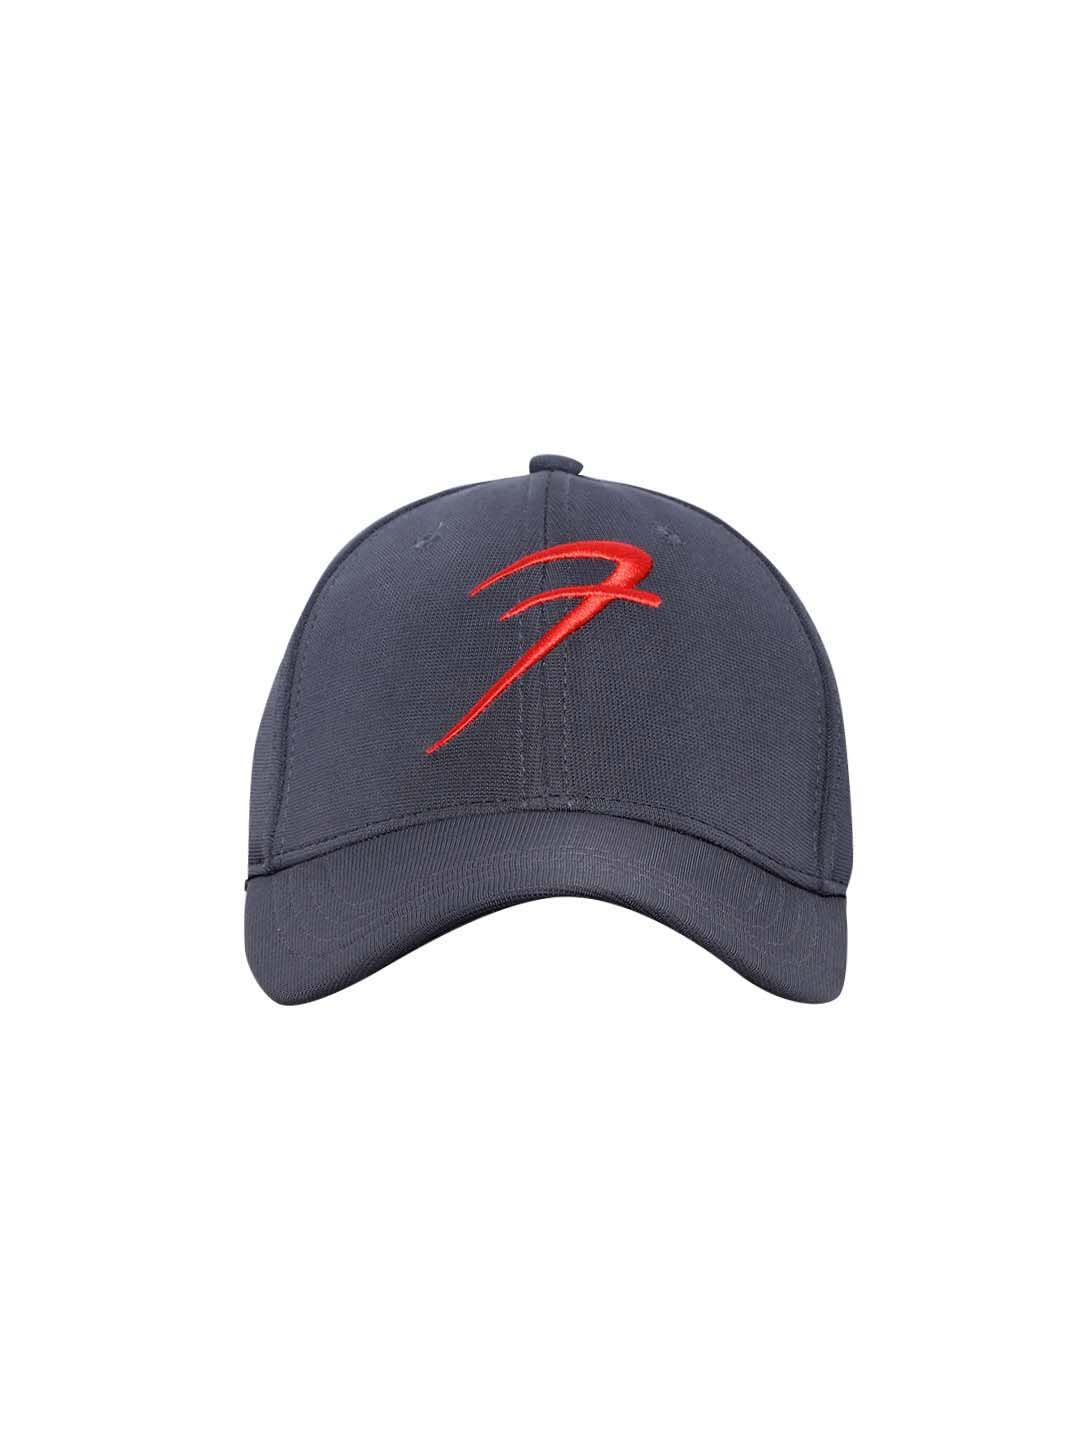 FUAARK Unisex Grey & Red Embroidered Baseball Cap Price in India